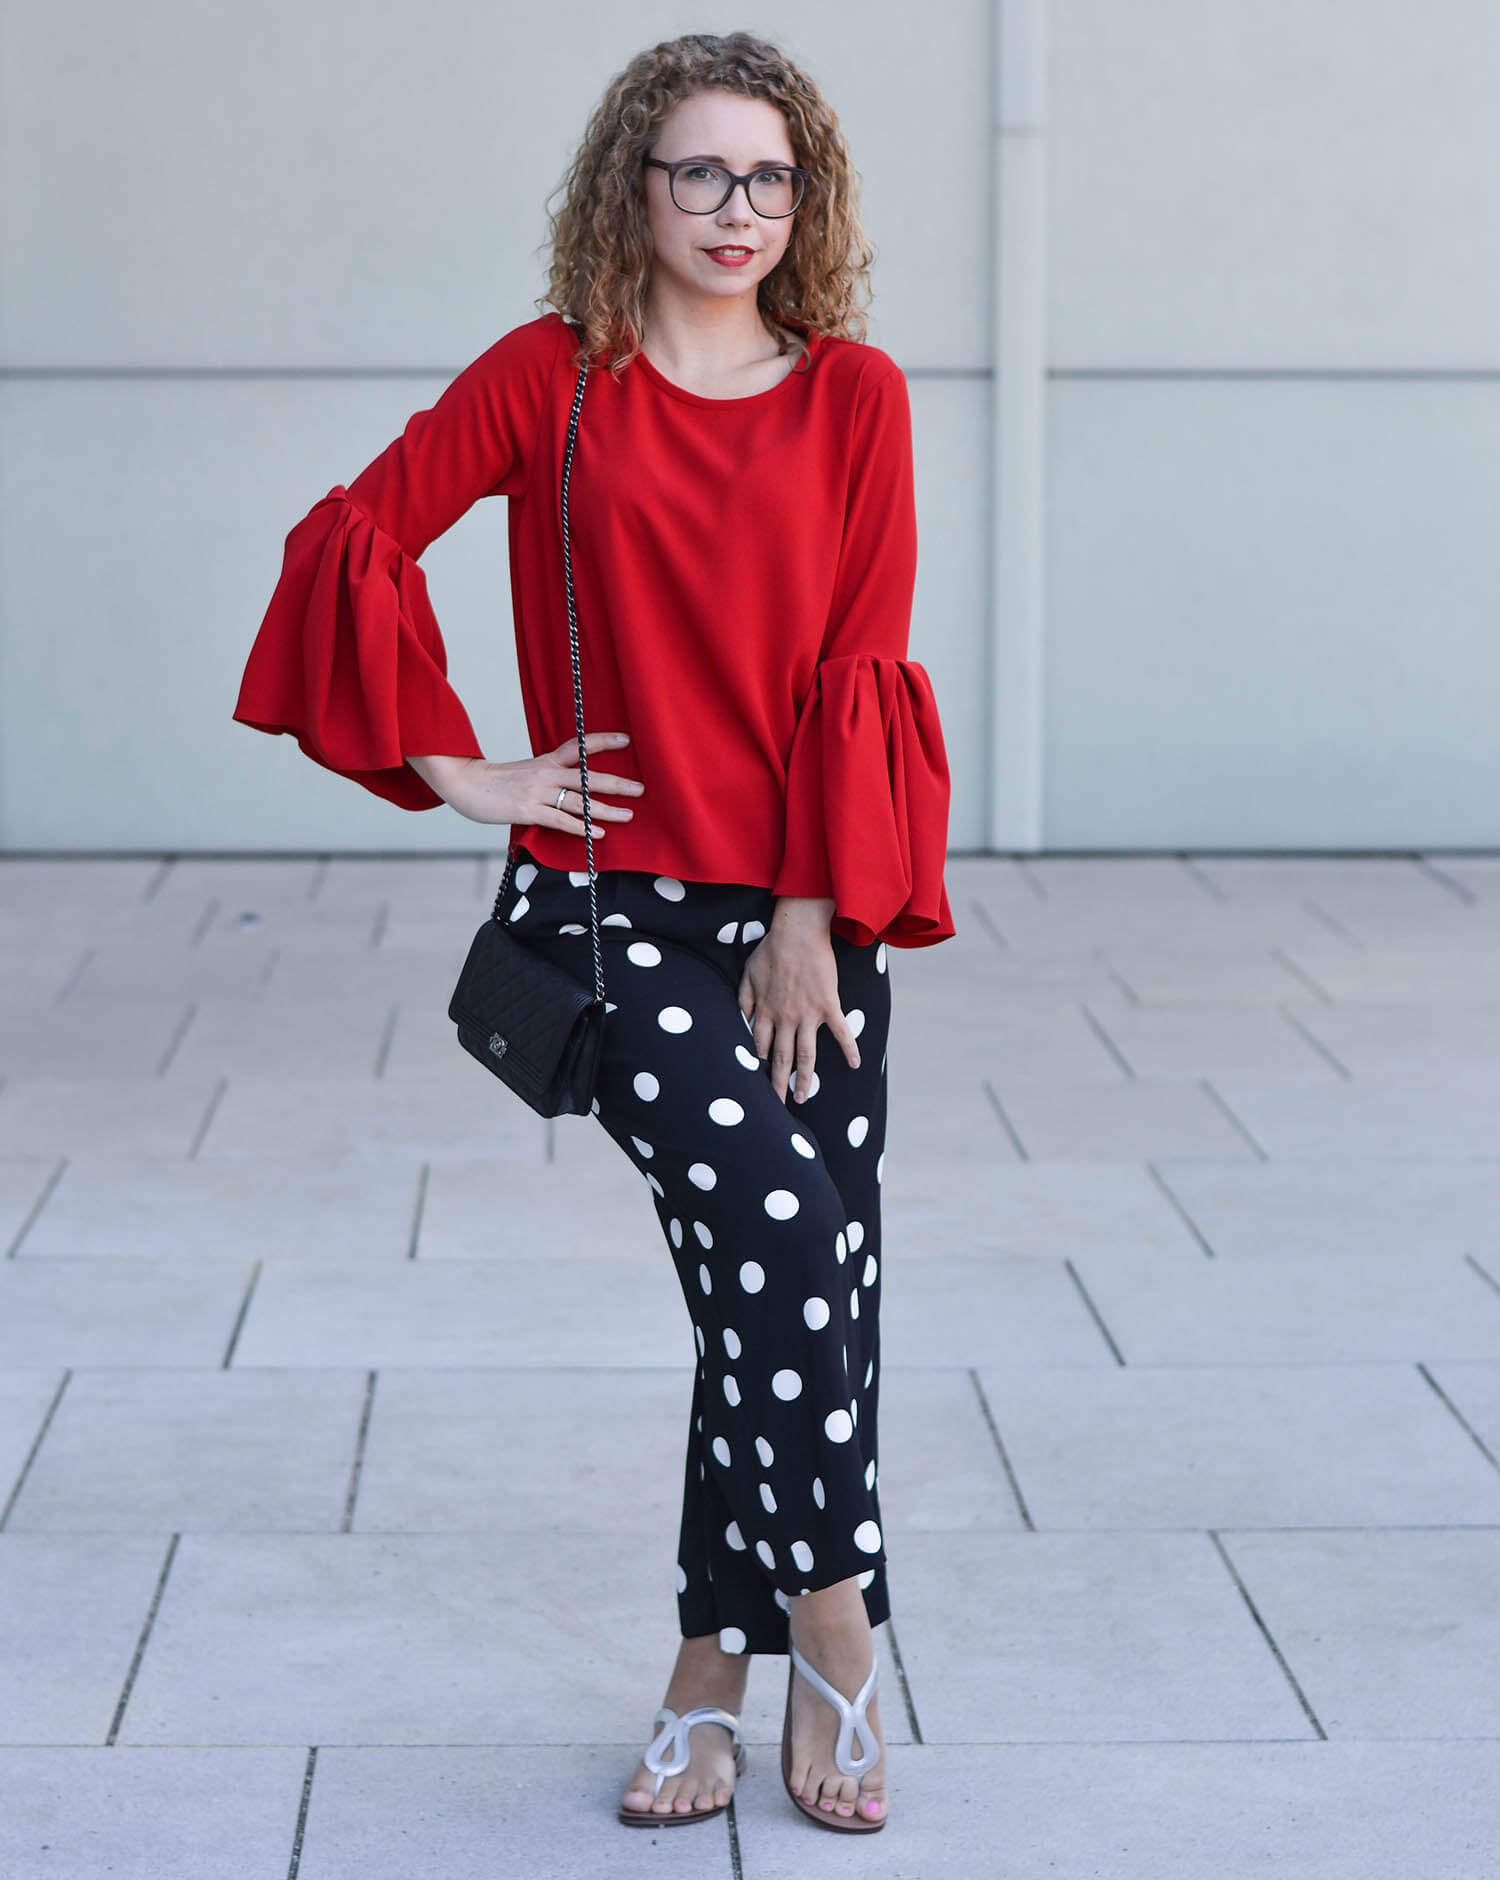 Outfit-Zara-Allover-with-Polka-Dots-Culotte-Zara-and-Red-Top-with-Pleats-kationette-fashionblogger-NRW